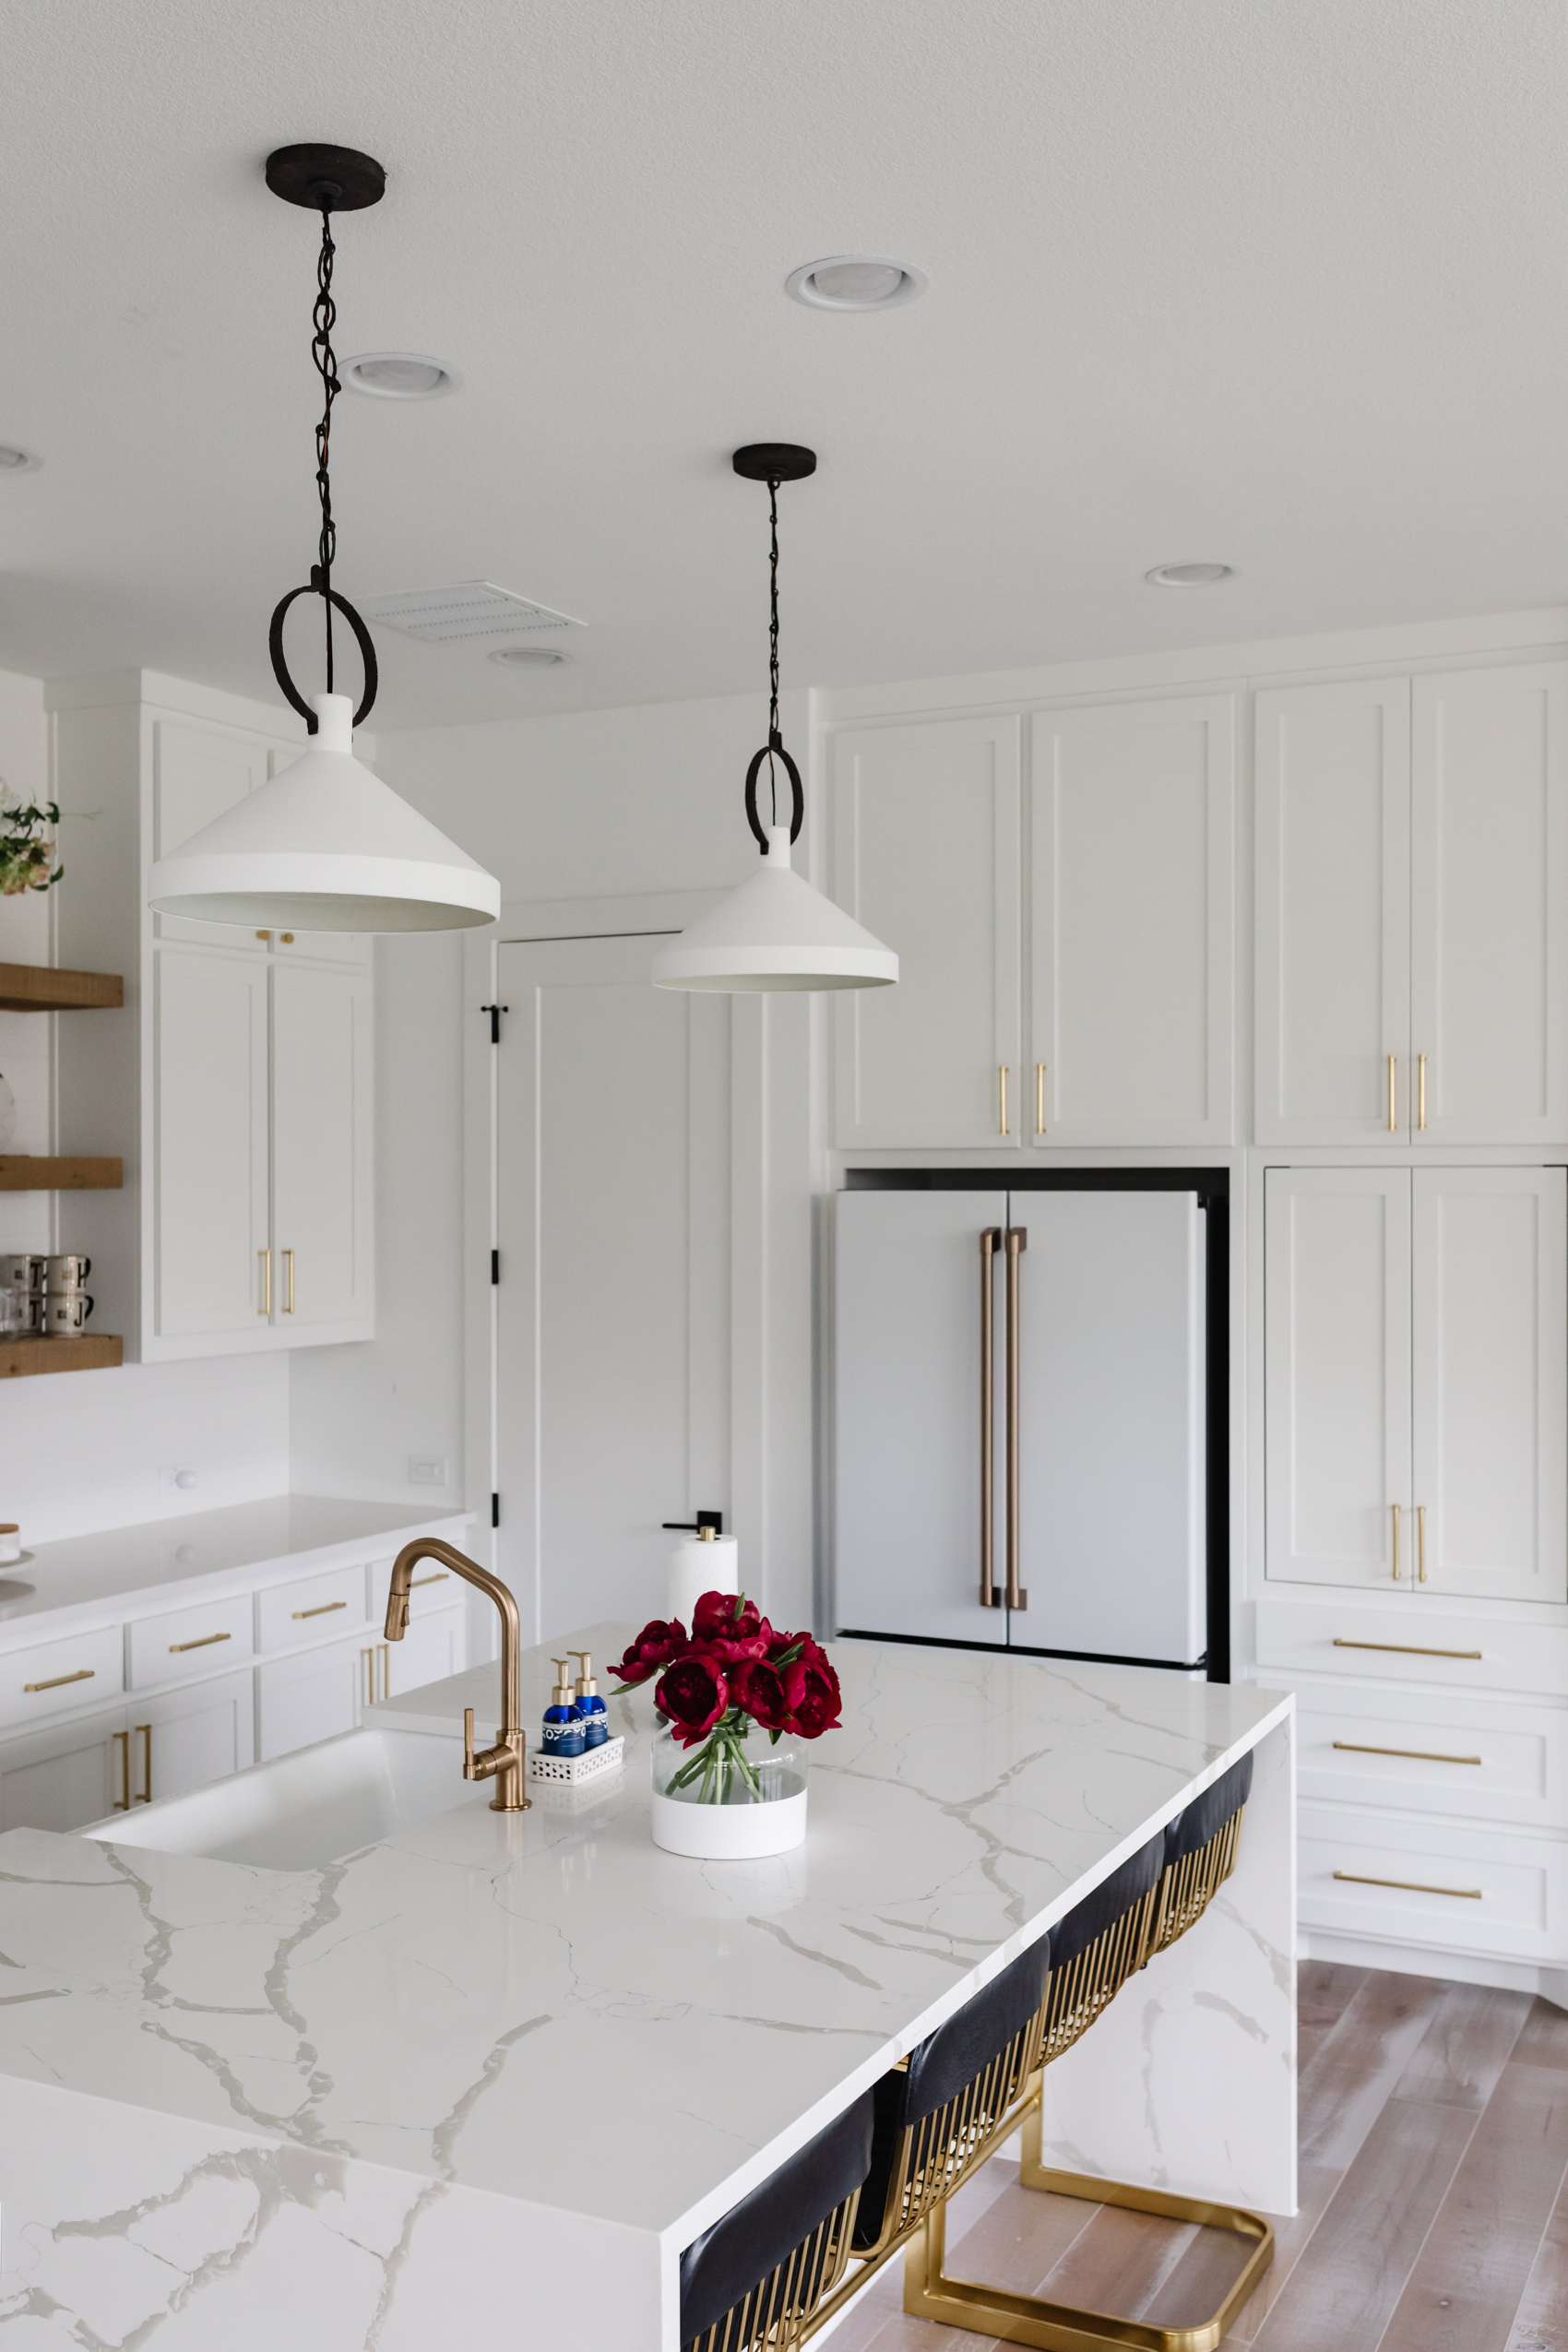 White Black and Brass transitional kitchen with white and black kitchen pendants, calacatta foresta quartz waterfall island and brizo faucet